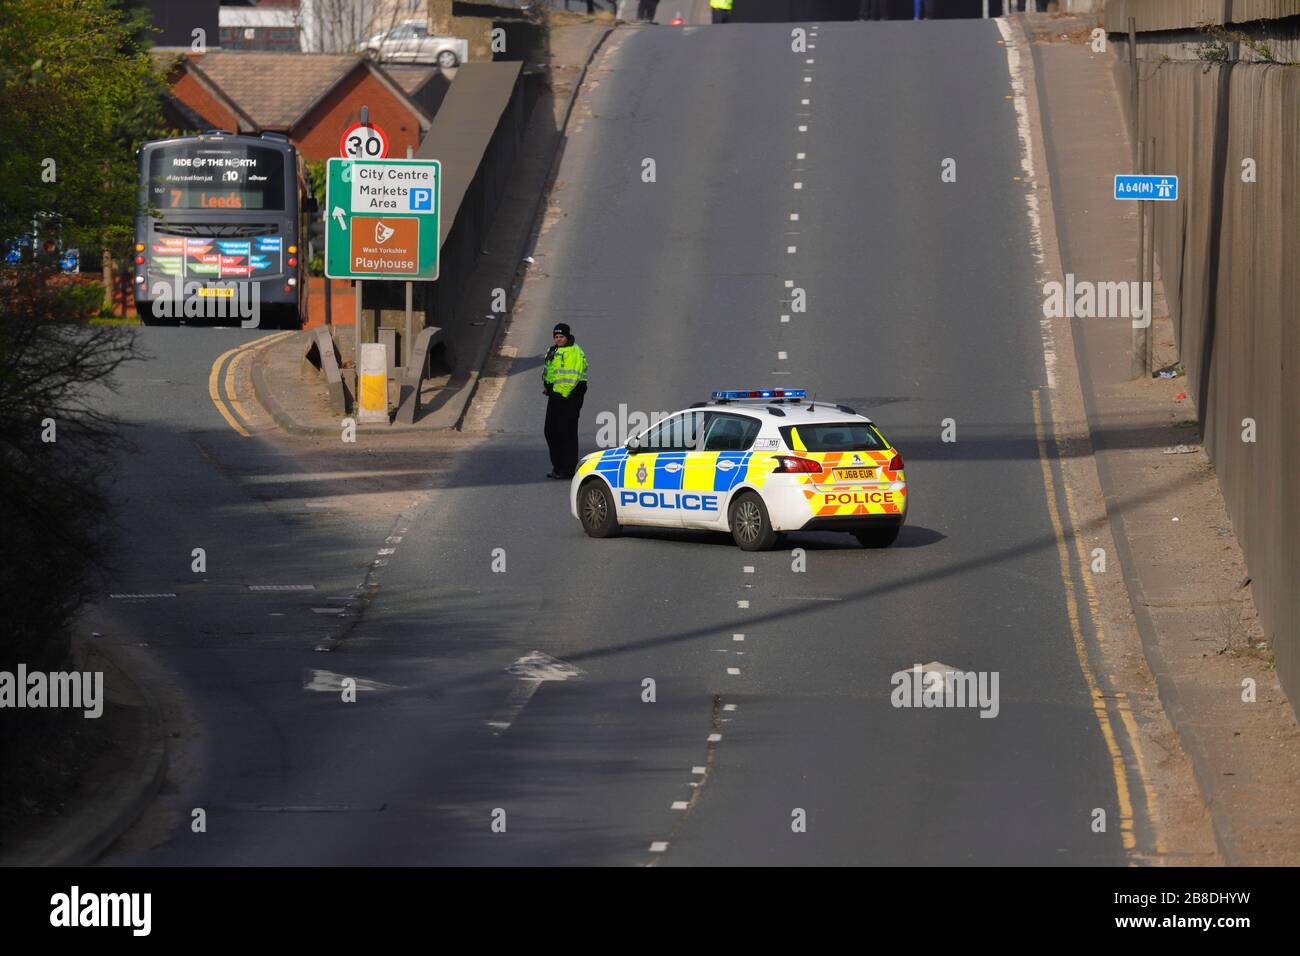 A Police vehicle diverts traffic by blocking the road, due to a man threatening to jump from a bridge in Leeds. Stock Photo